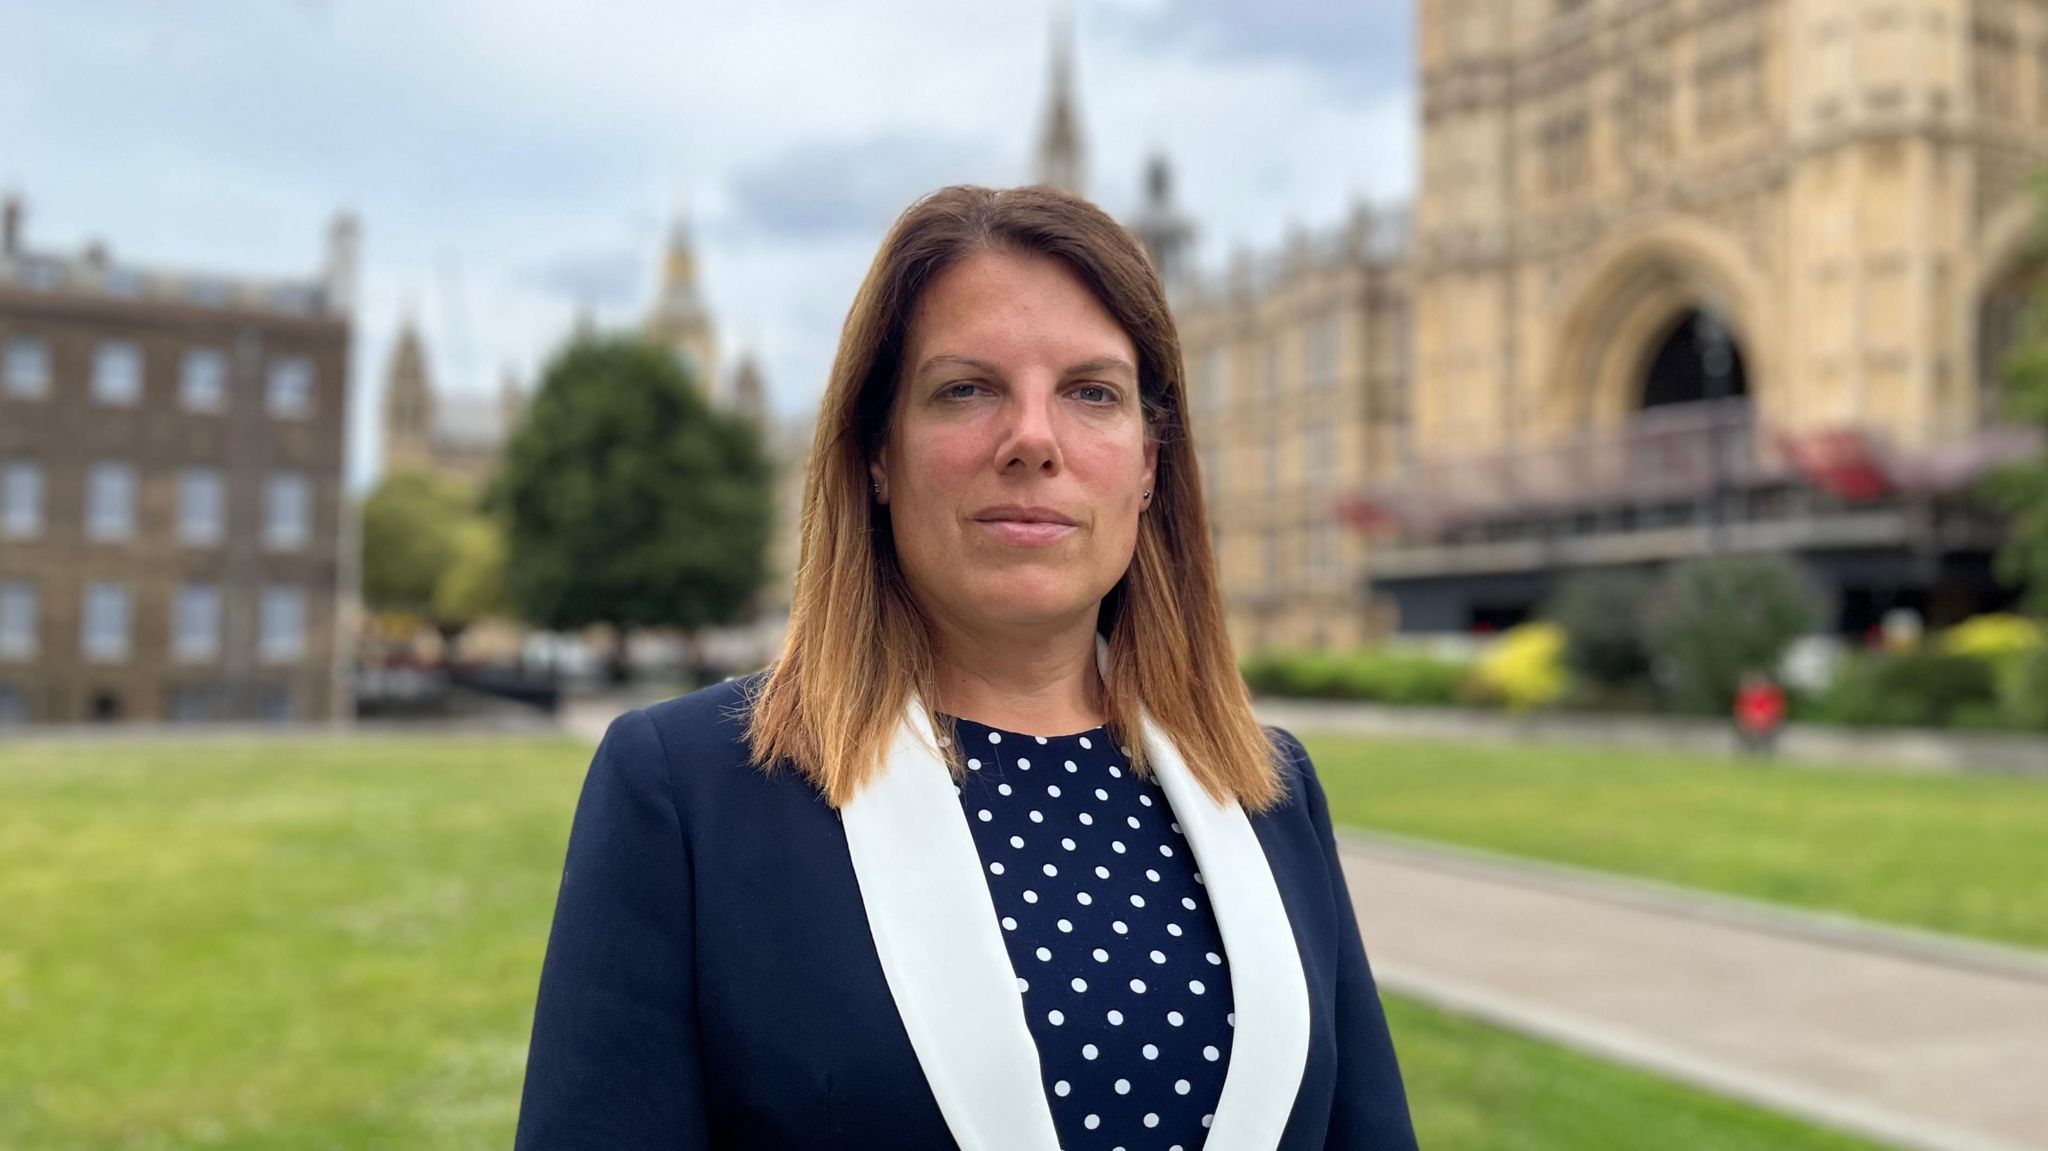 An image of Caroline Nokes MP, who is wearing a navy top with white polka dots and a navy jacket with a white lapel, at College Green